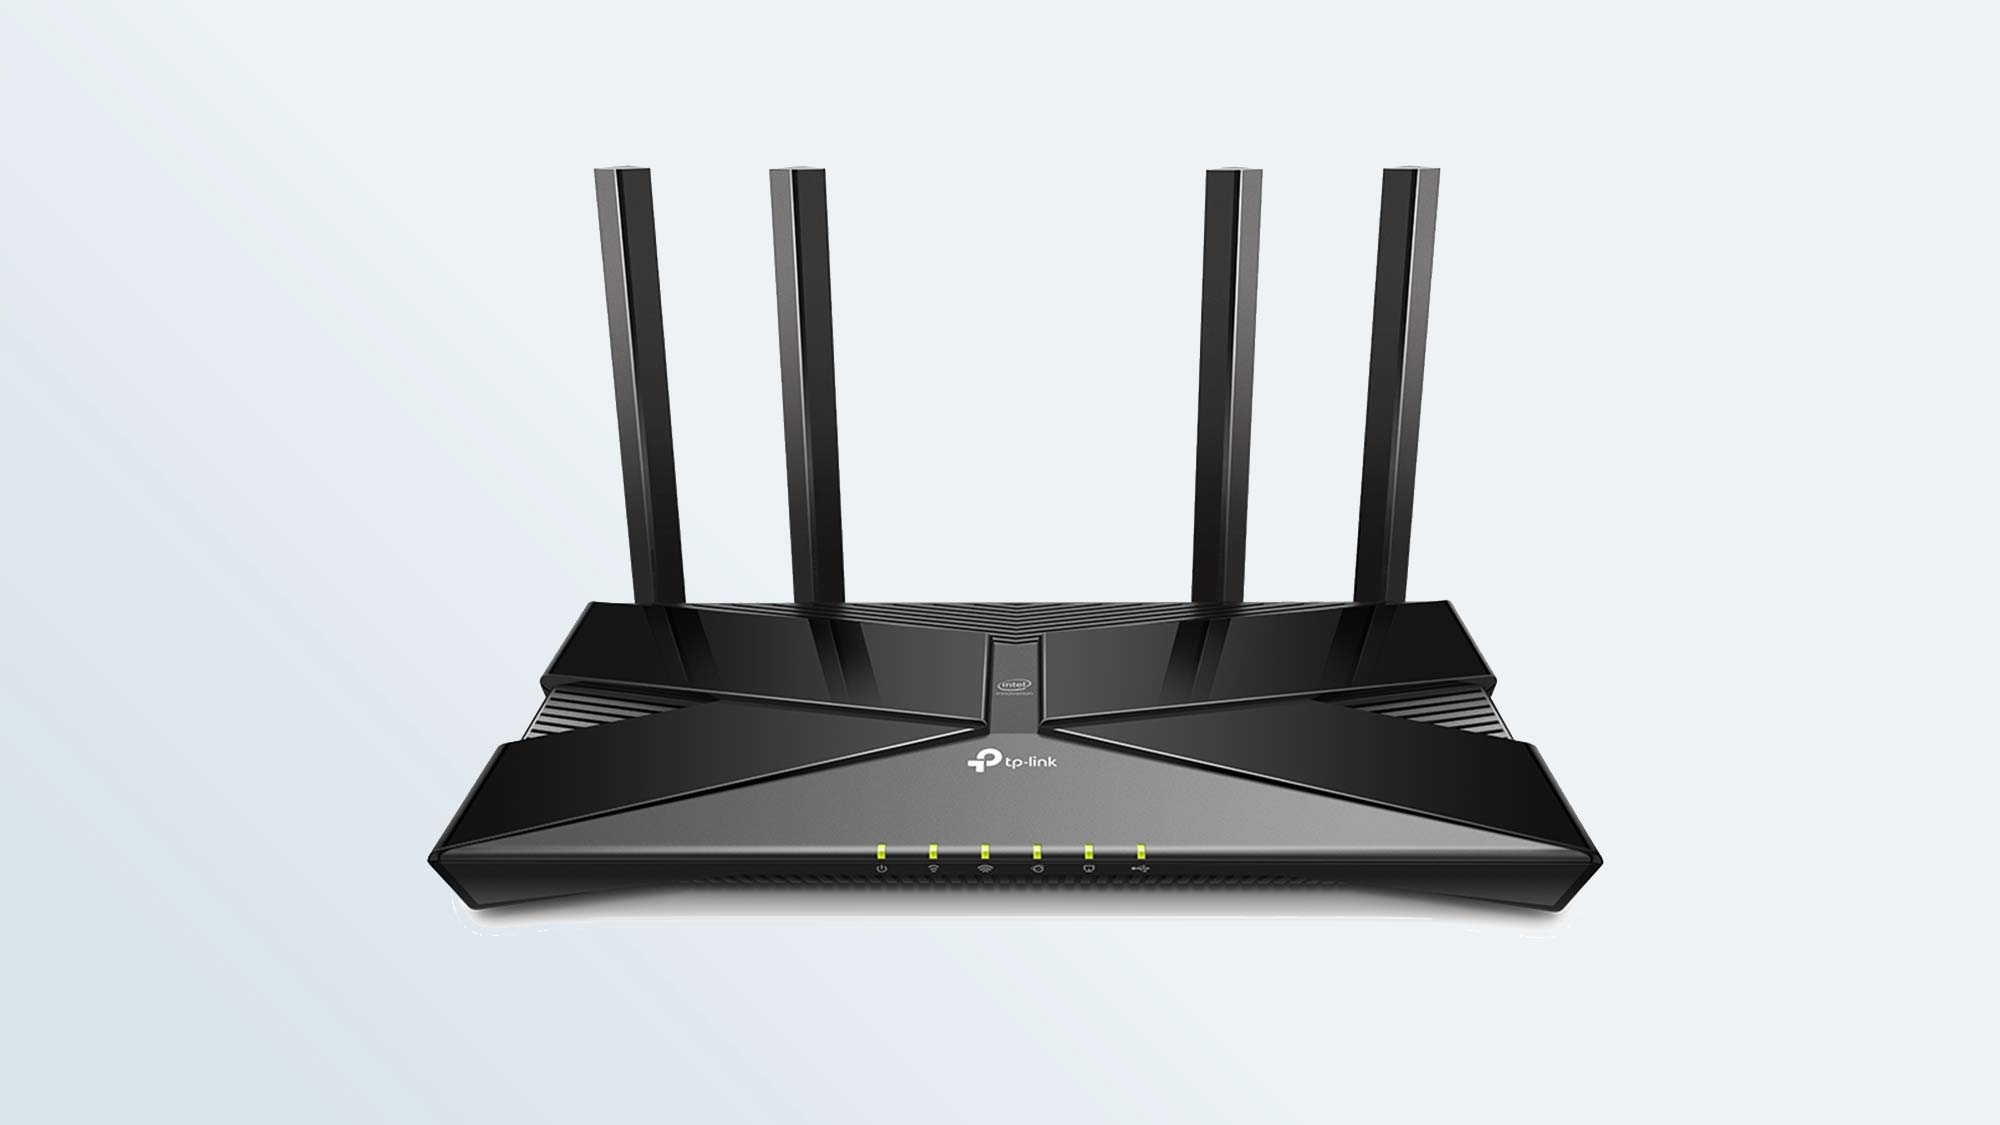 best Wi-Fi 6 routers: TP-Link Archer AX50 WiFi 6 AX3000 Smart WiFi Router